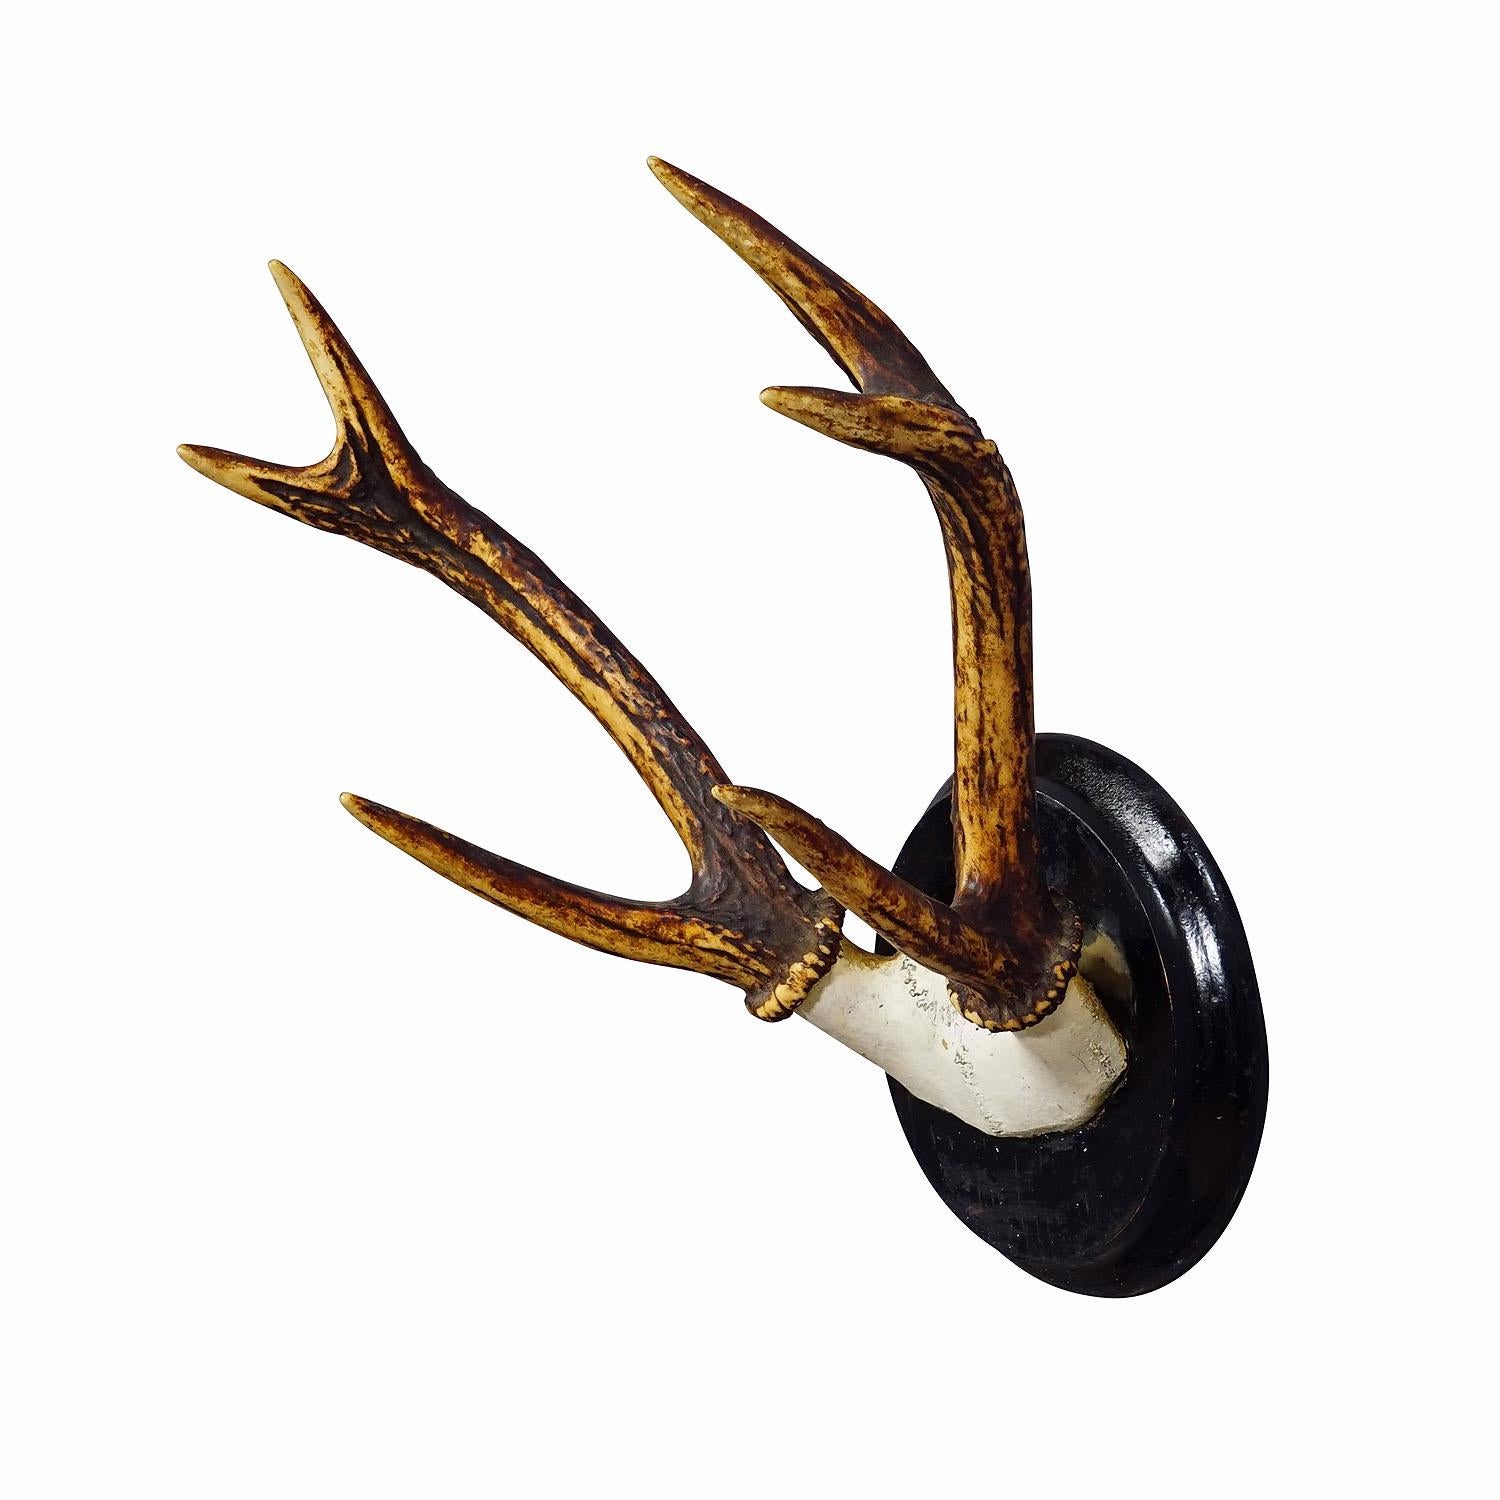 Black Forest Sika Deer Trophy on Wooden Plaque - Germany ca. 1900s

An antique 6 pointer sika deer (Cervus nippon) trophy from the Black Forest. The trophy was shot around 1900. The antlers are mounted on a turned wooden wall plaque with black